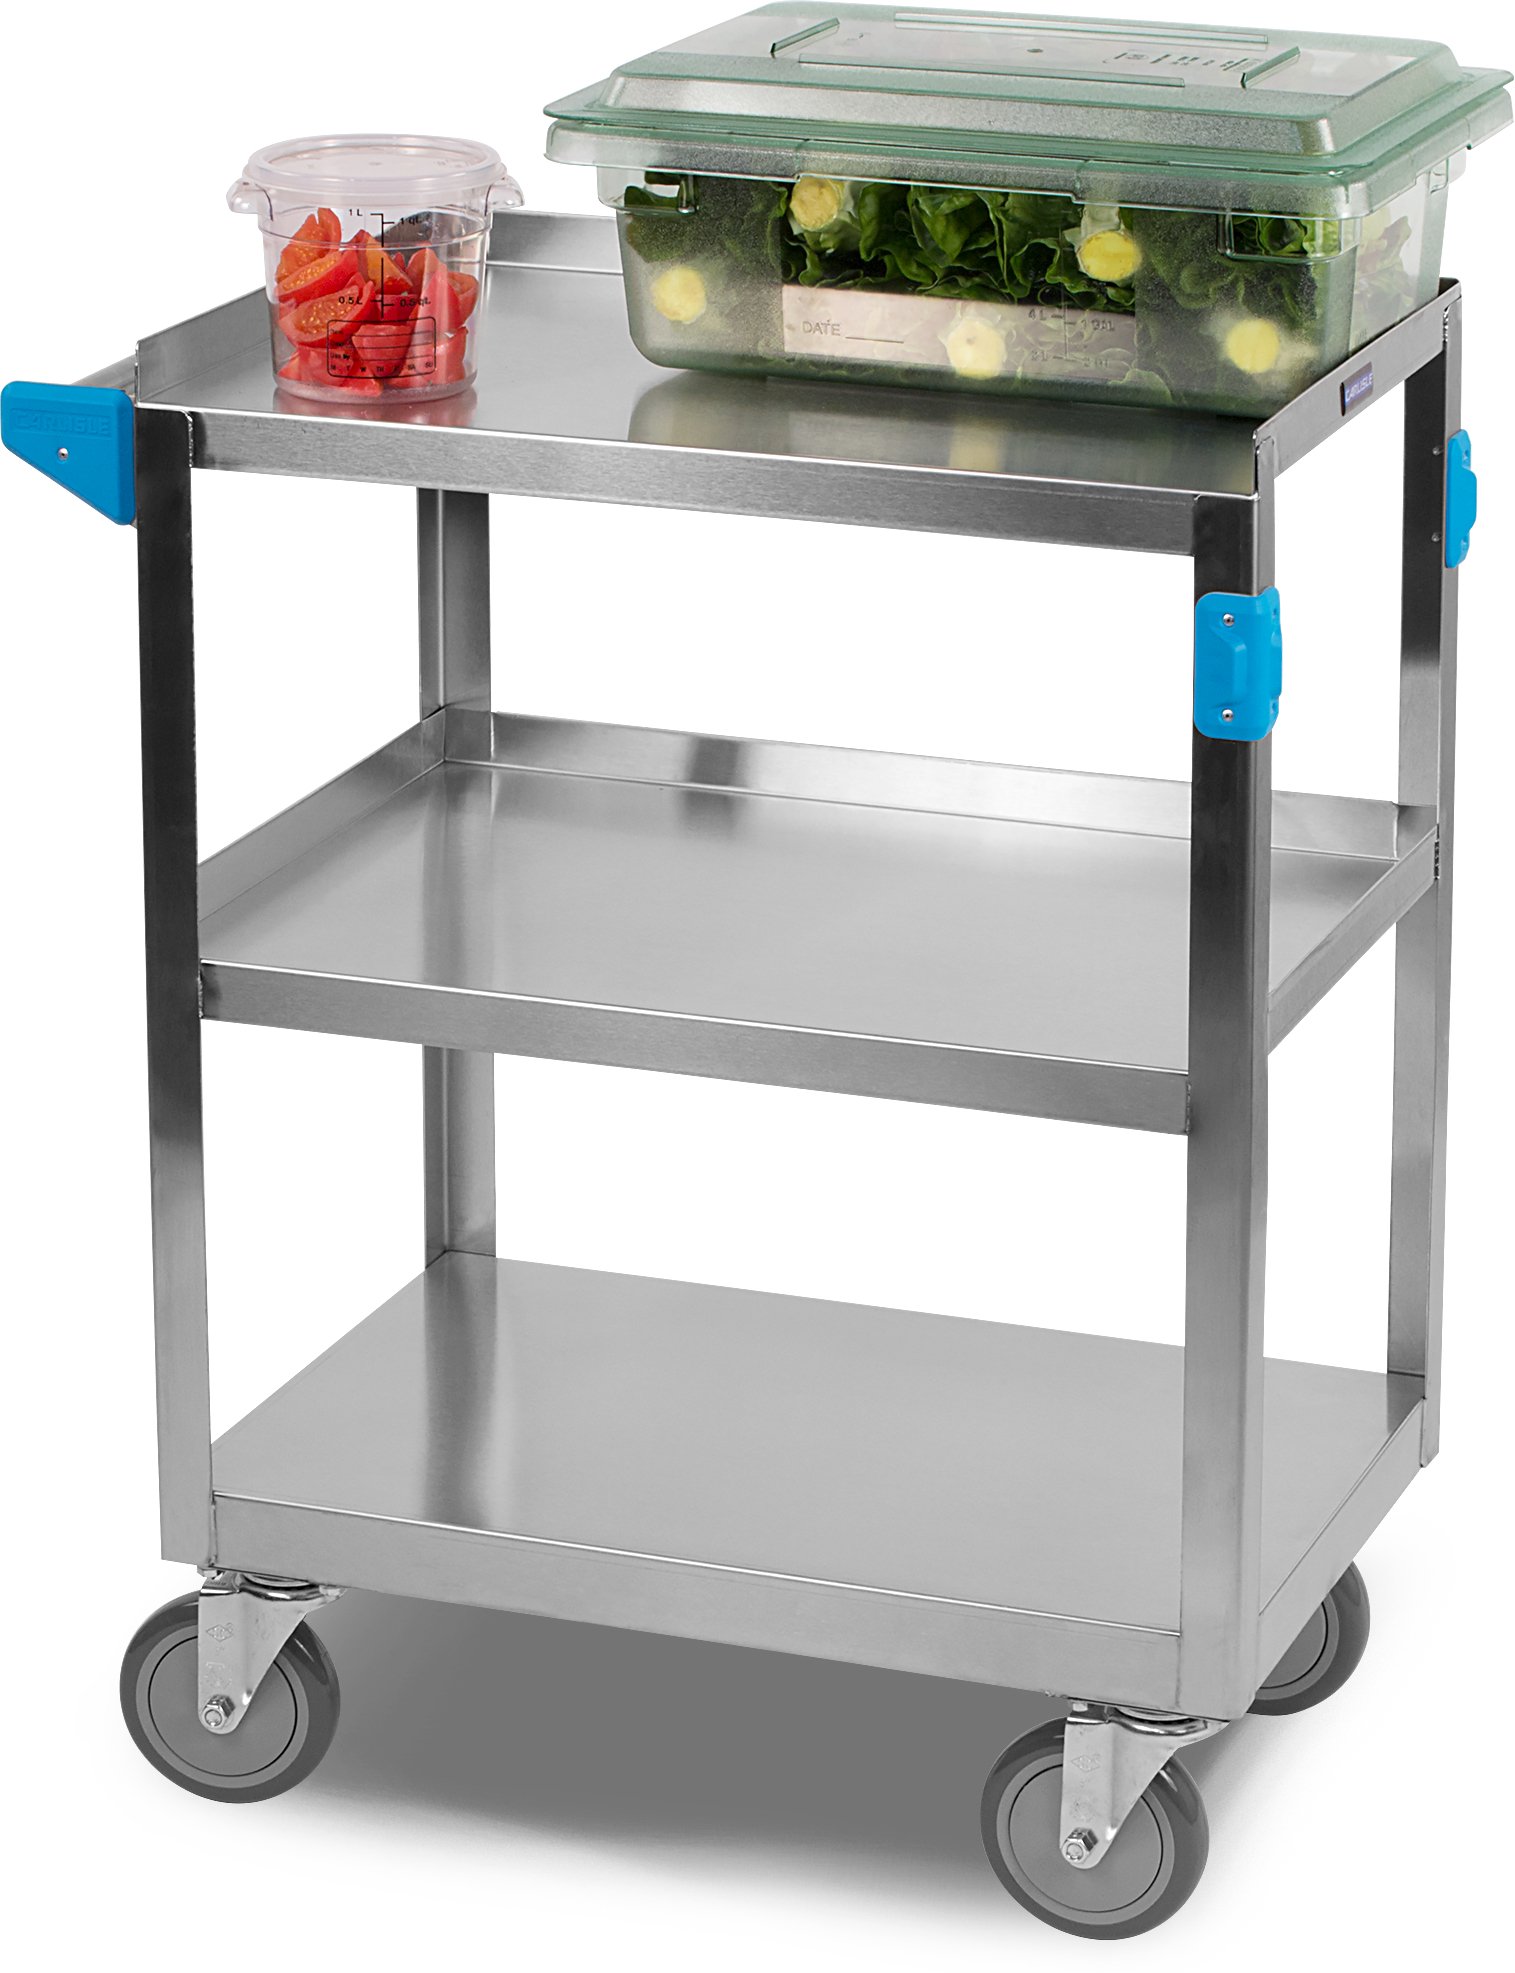 Carlisle FoodService Products Stainless Steel 3 Shelf Utility Cart, 15.5" x 24", Silver, 300 Pound Capacity